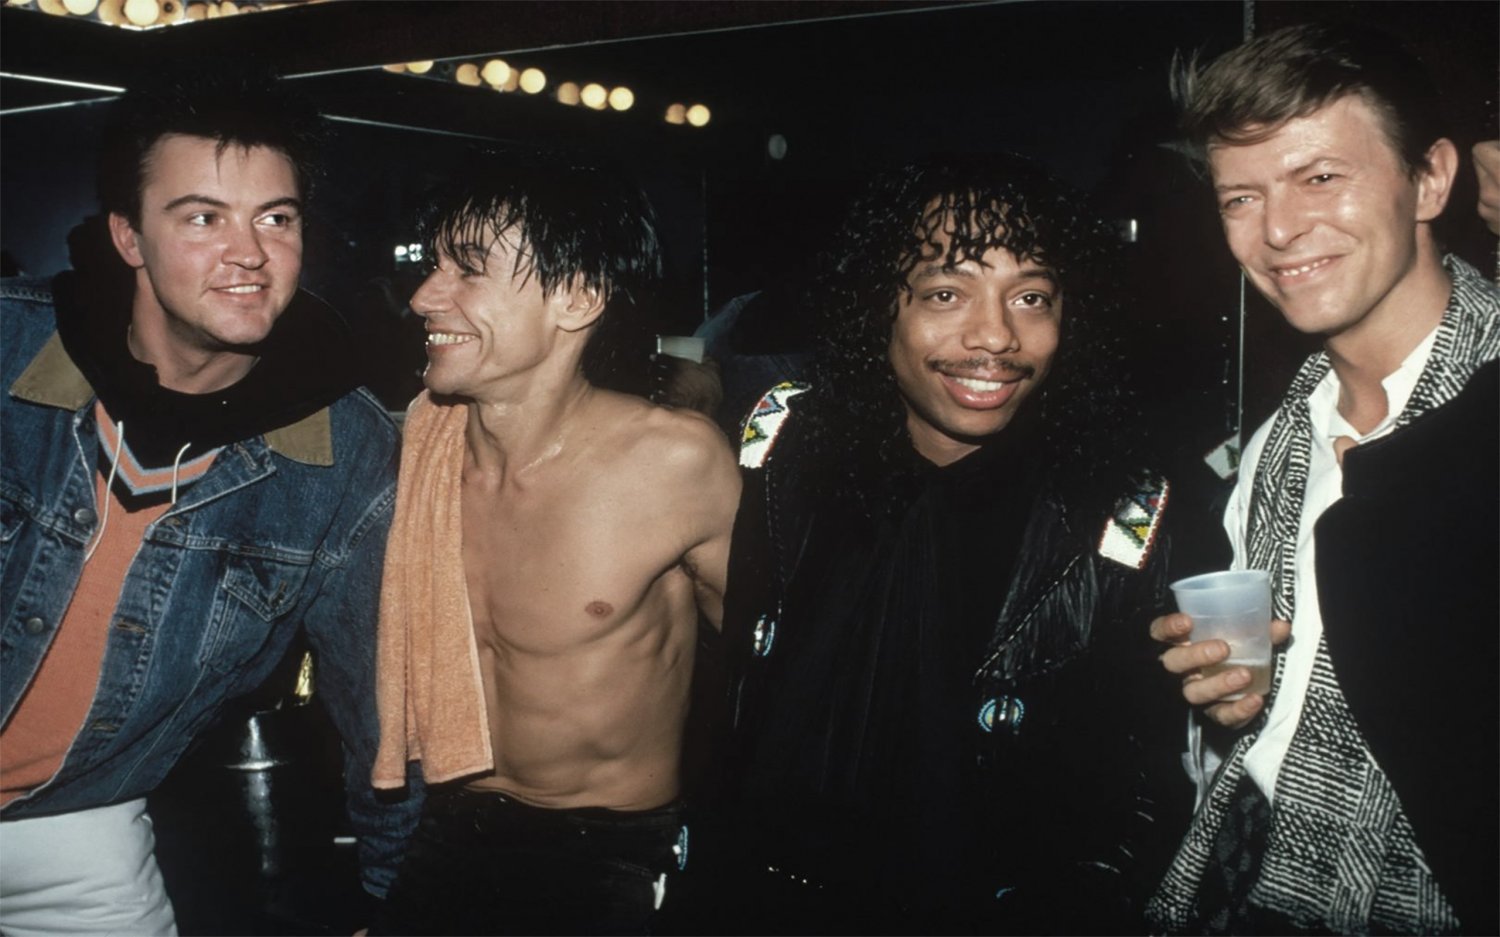 Paul Young, Iggy Pop, Rick James and David Bowie 13"x19" (32cm/49cm) Polyester Fabric Poster